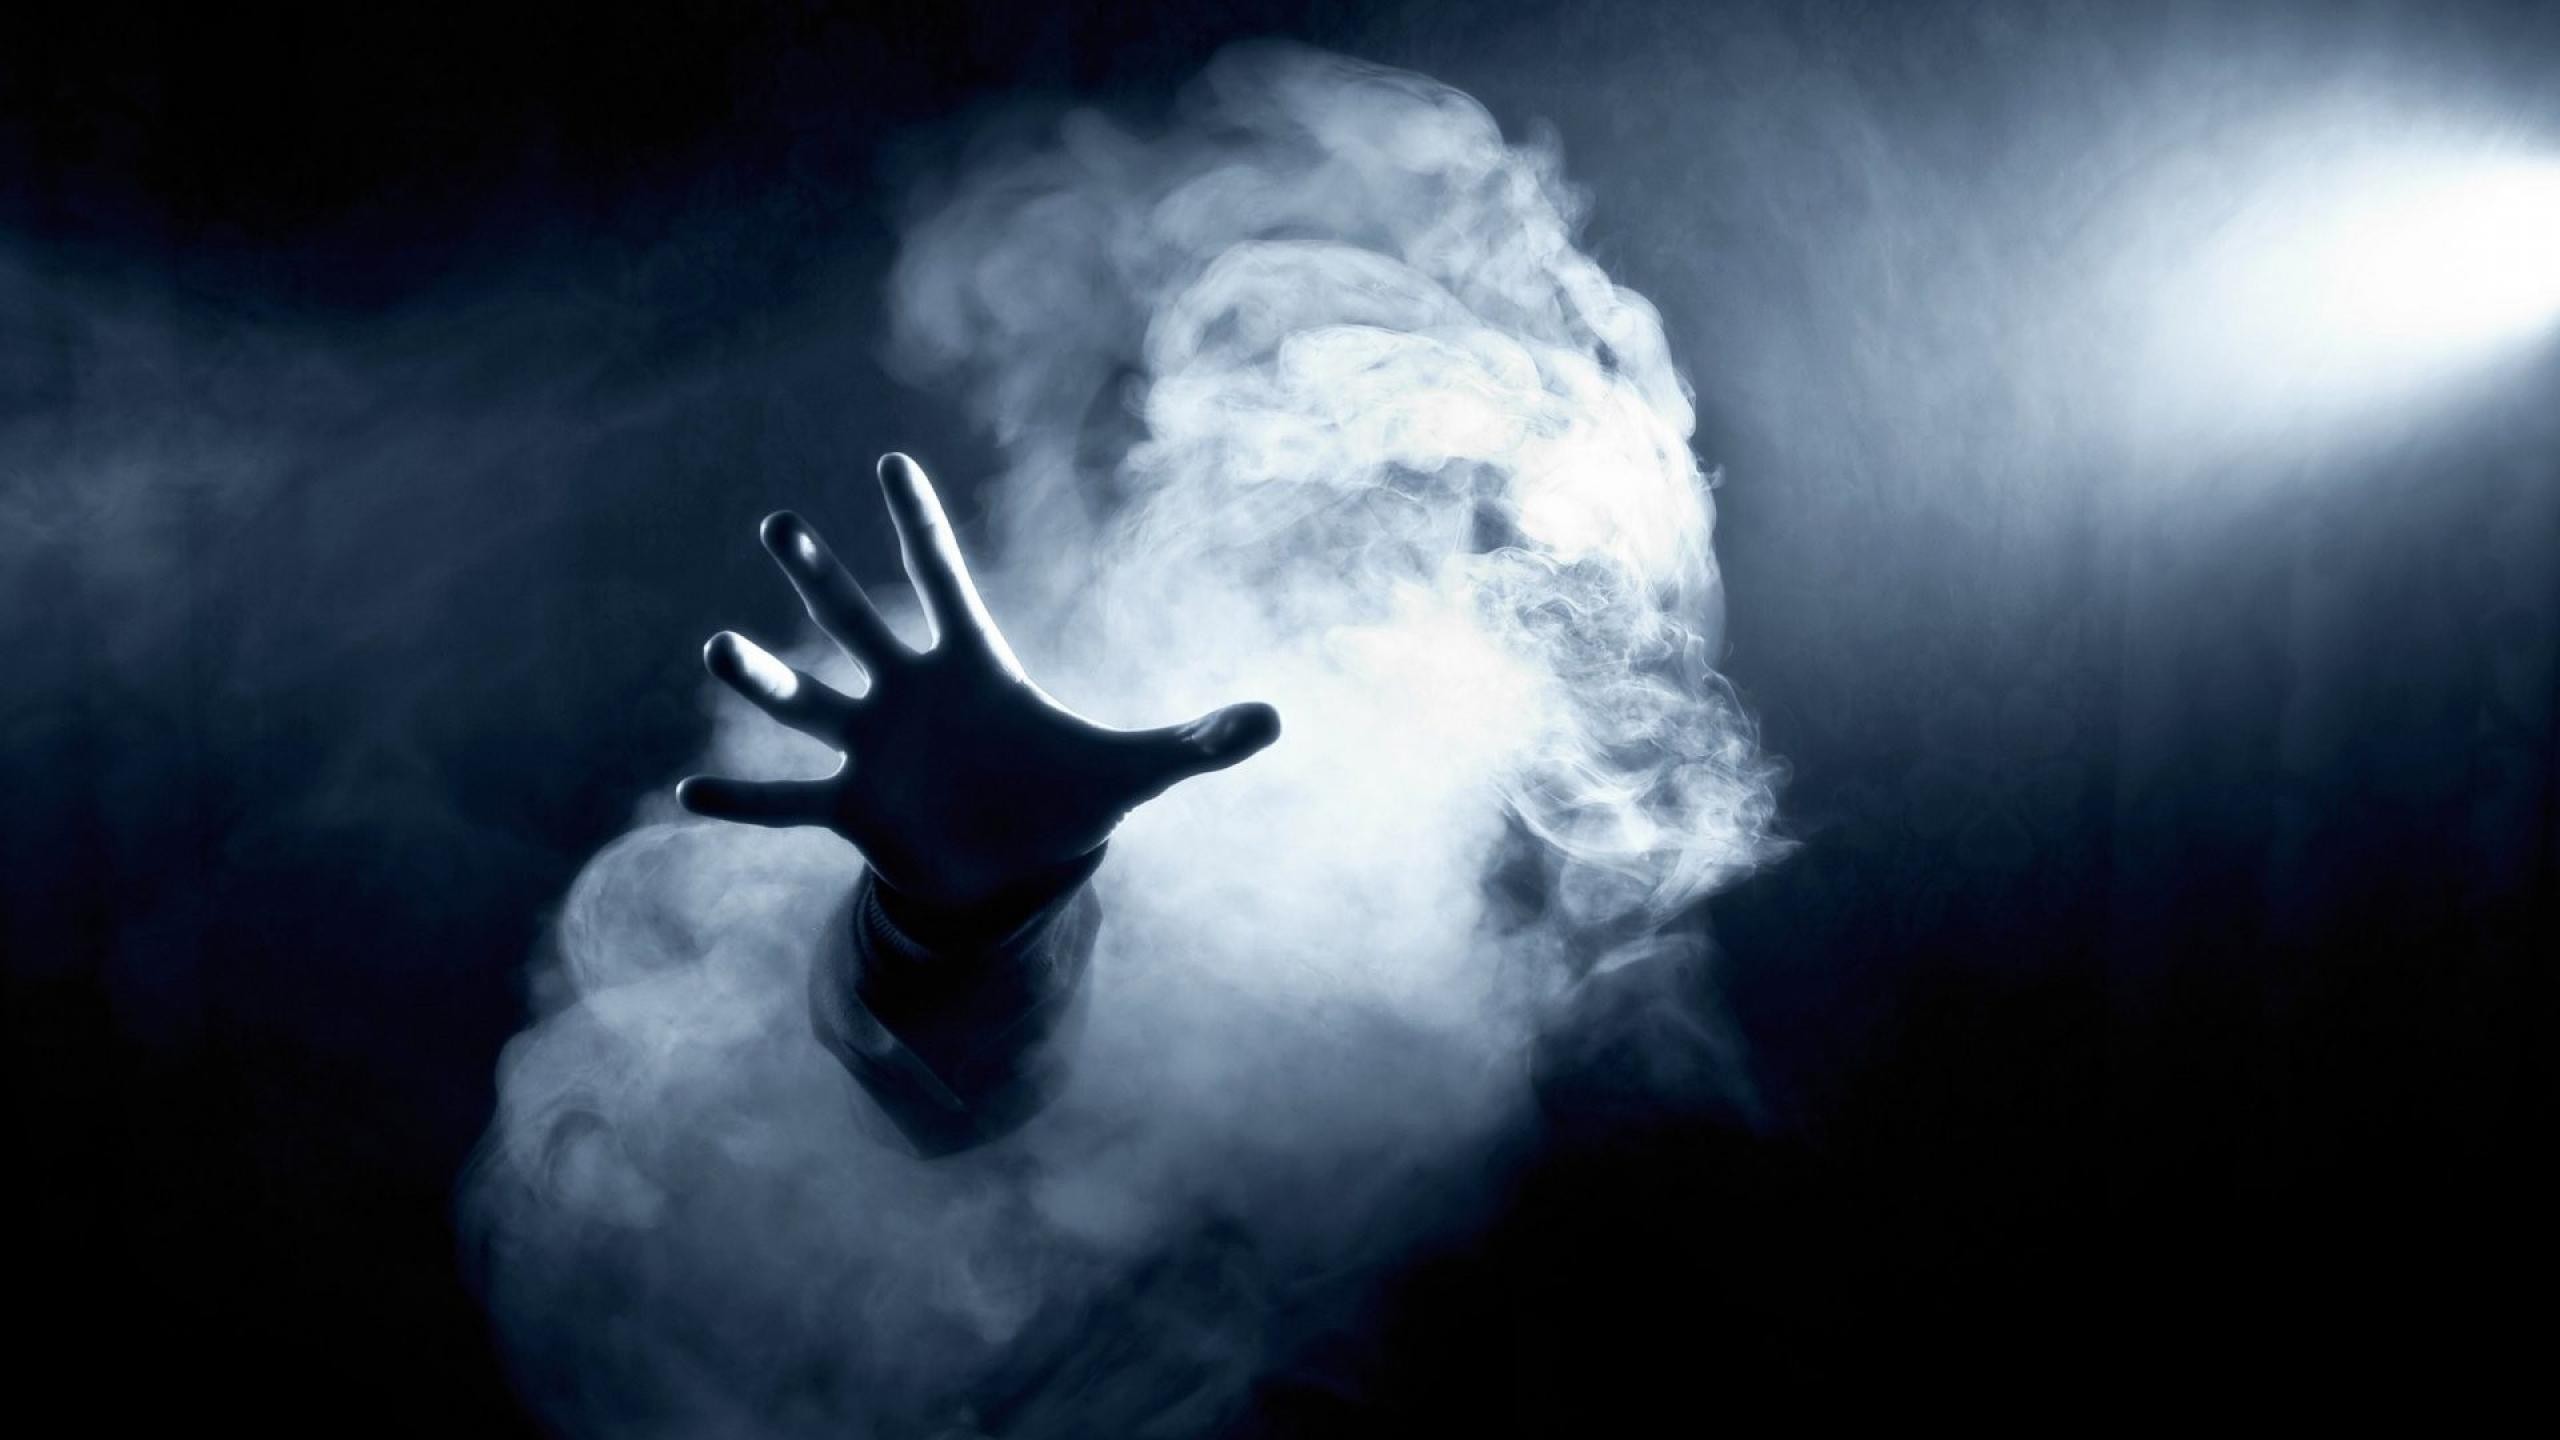 2560x1440 Real Ghost Photos. Ghost wallpaper download